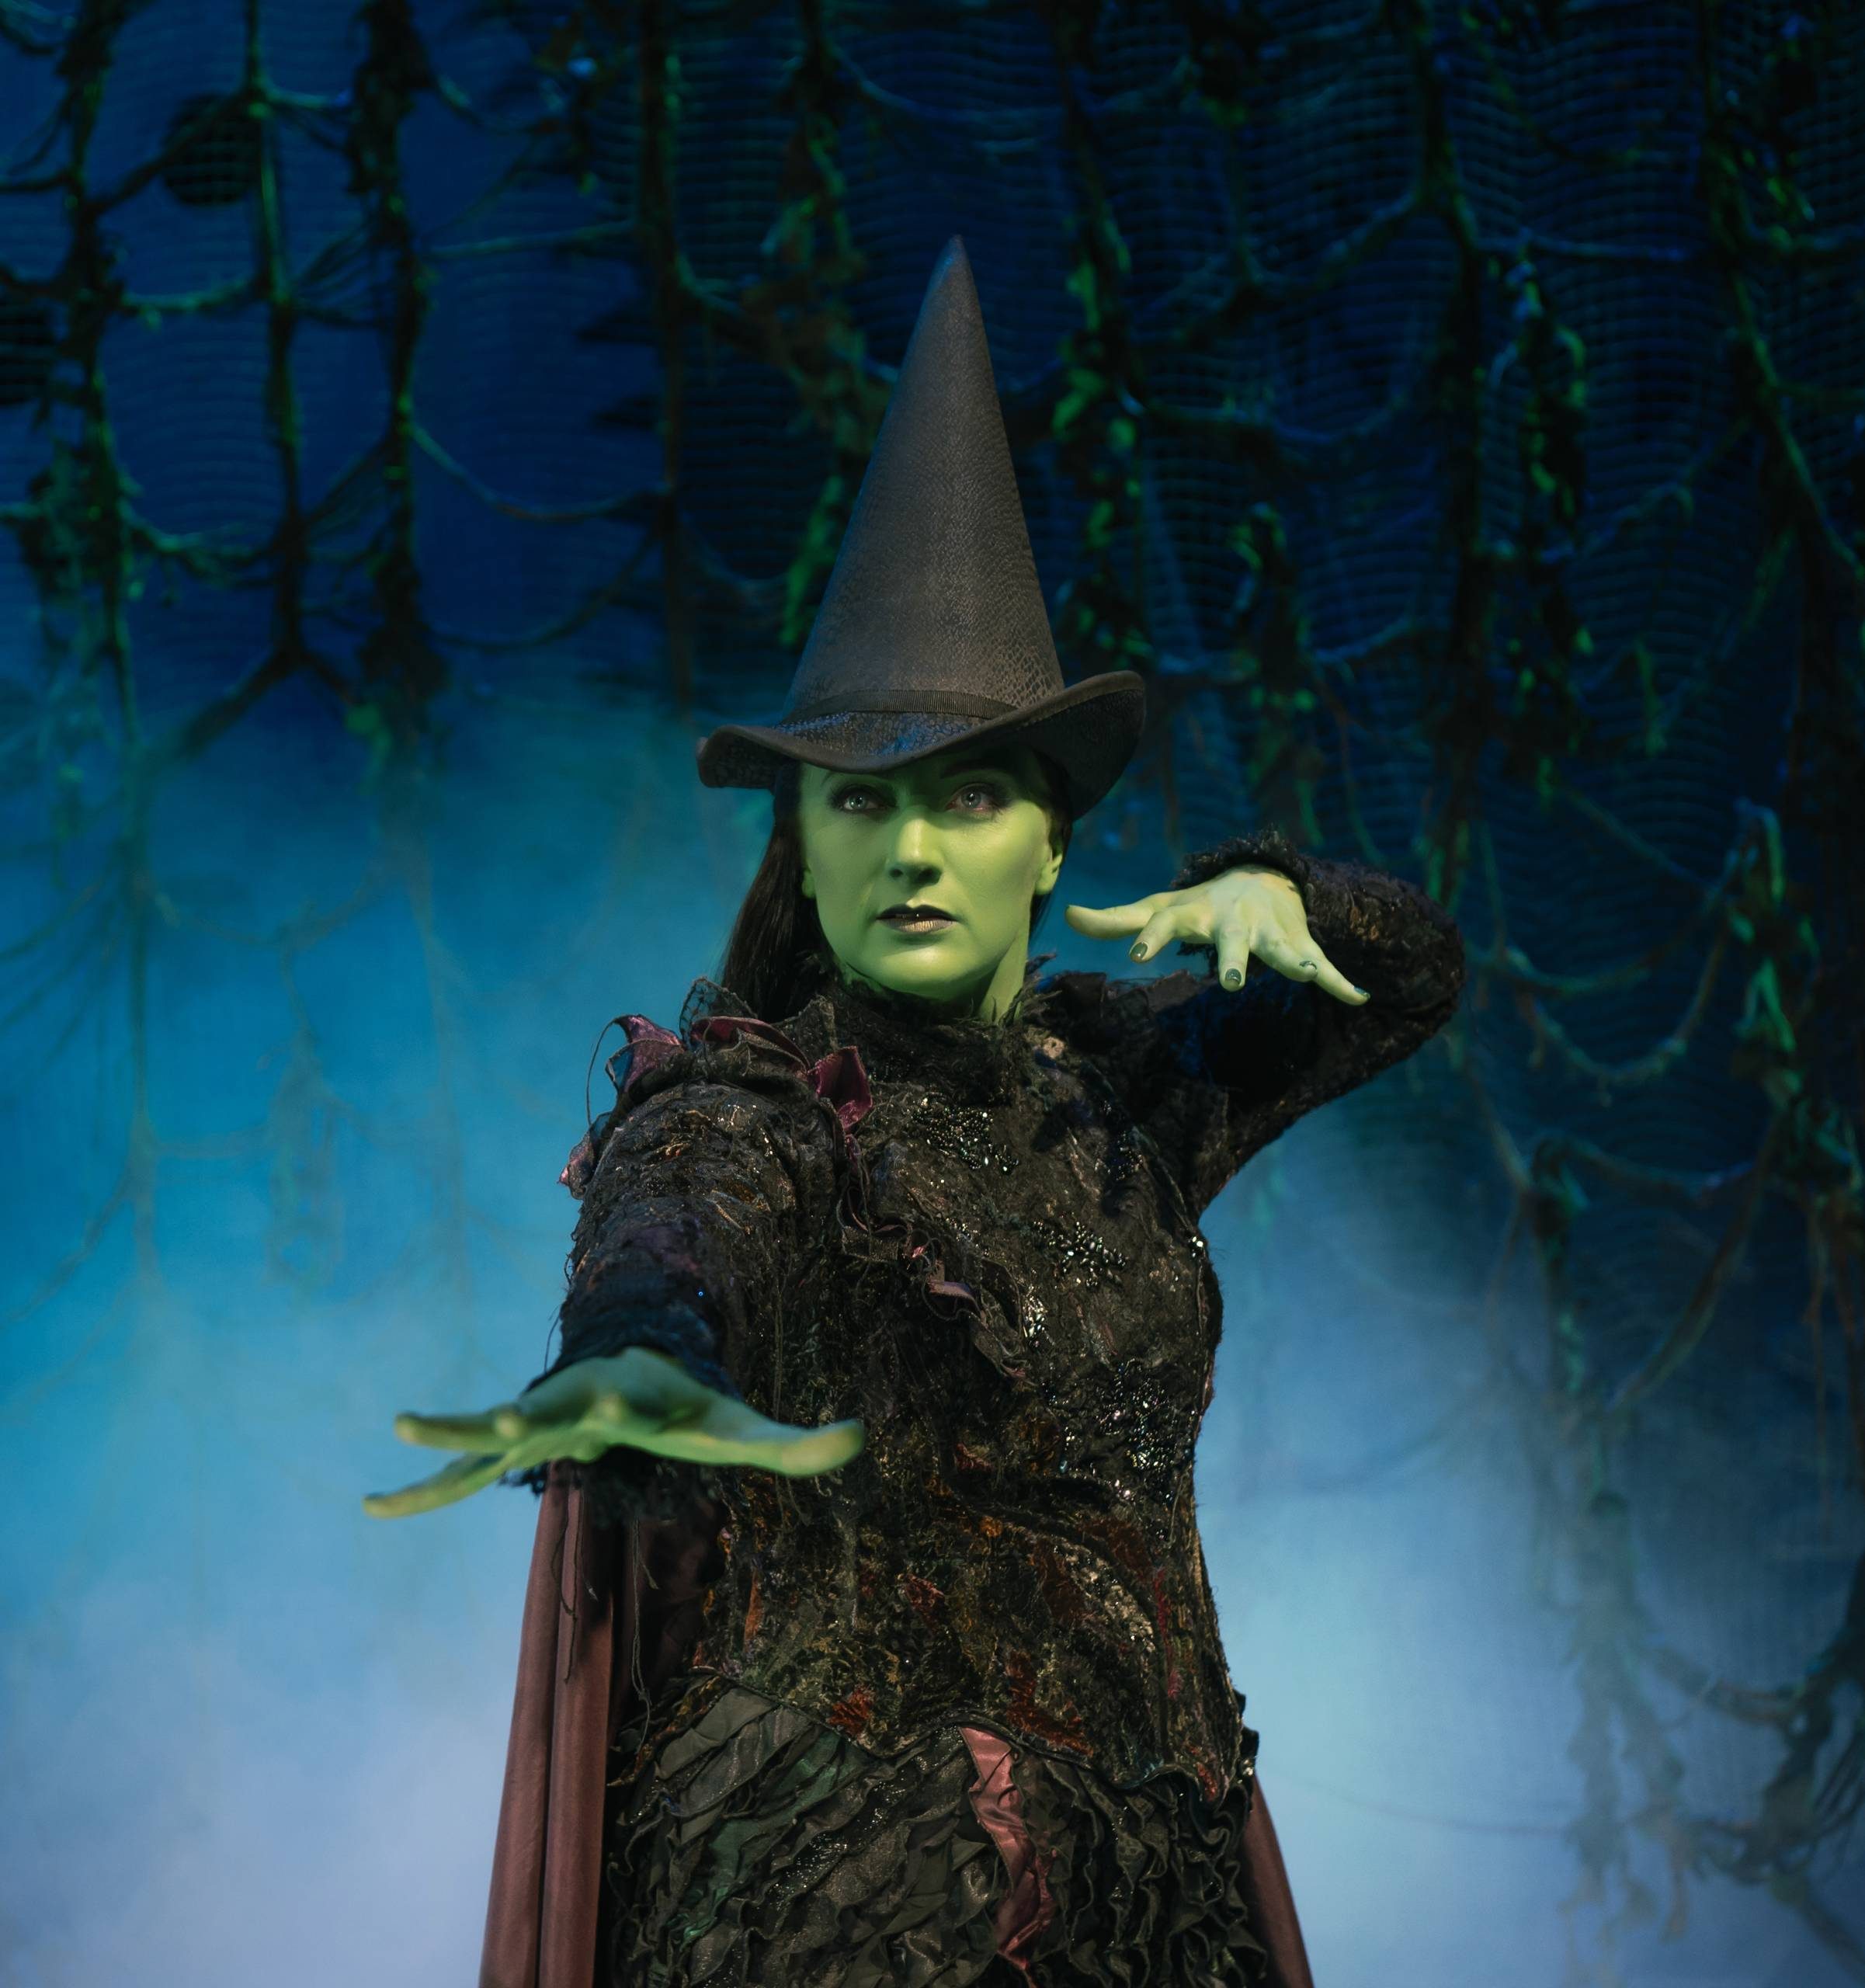 Laura Pick as Elphaba waving her hands as though casting a spell in a forest at night